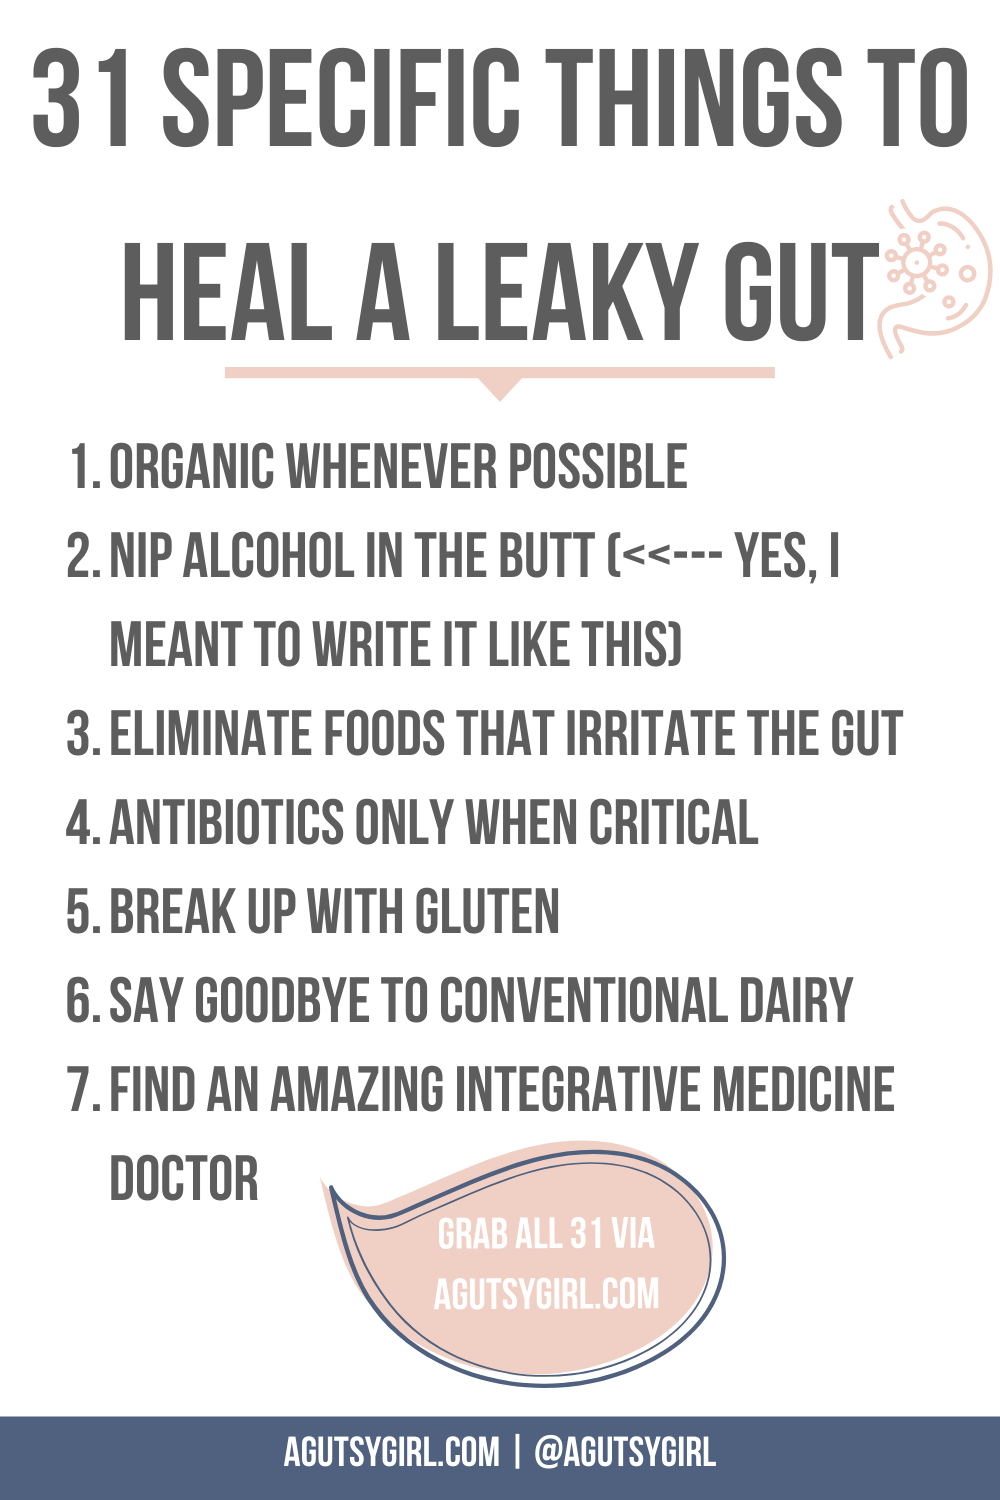 31 specific ways to heal a leaky gut agutsygirl.com31 specific ways to heal a leaky gut agutsygirl.com #leakygut #healleakygut #guthealth #leakygutsyndrome #leakygut #healleakygut #guthealth #leakygutsyndrome